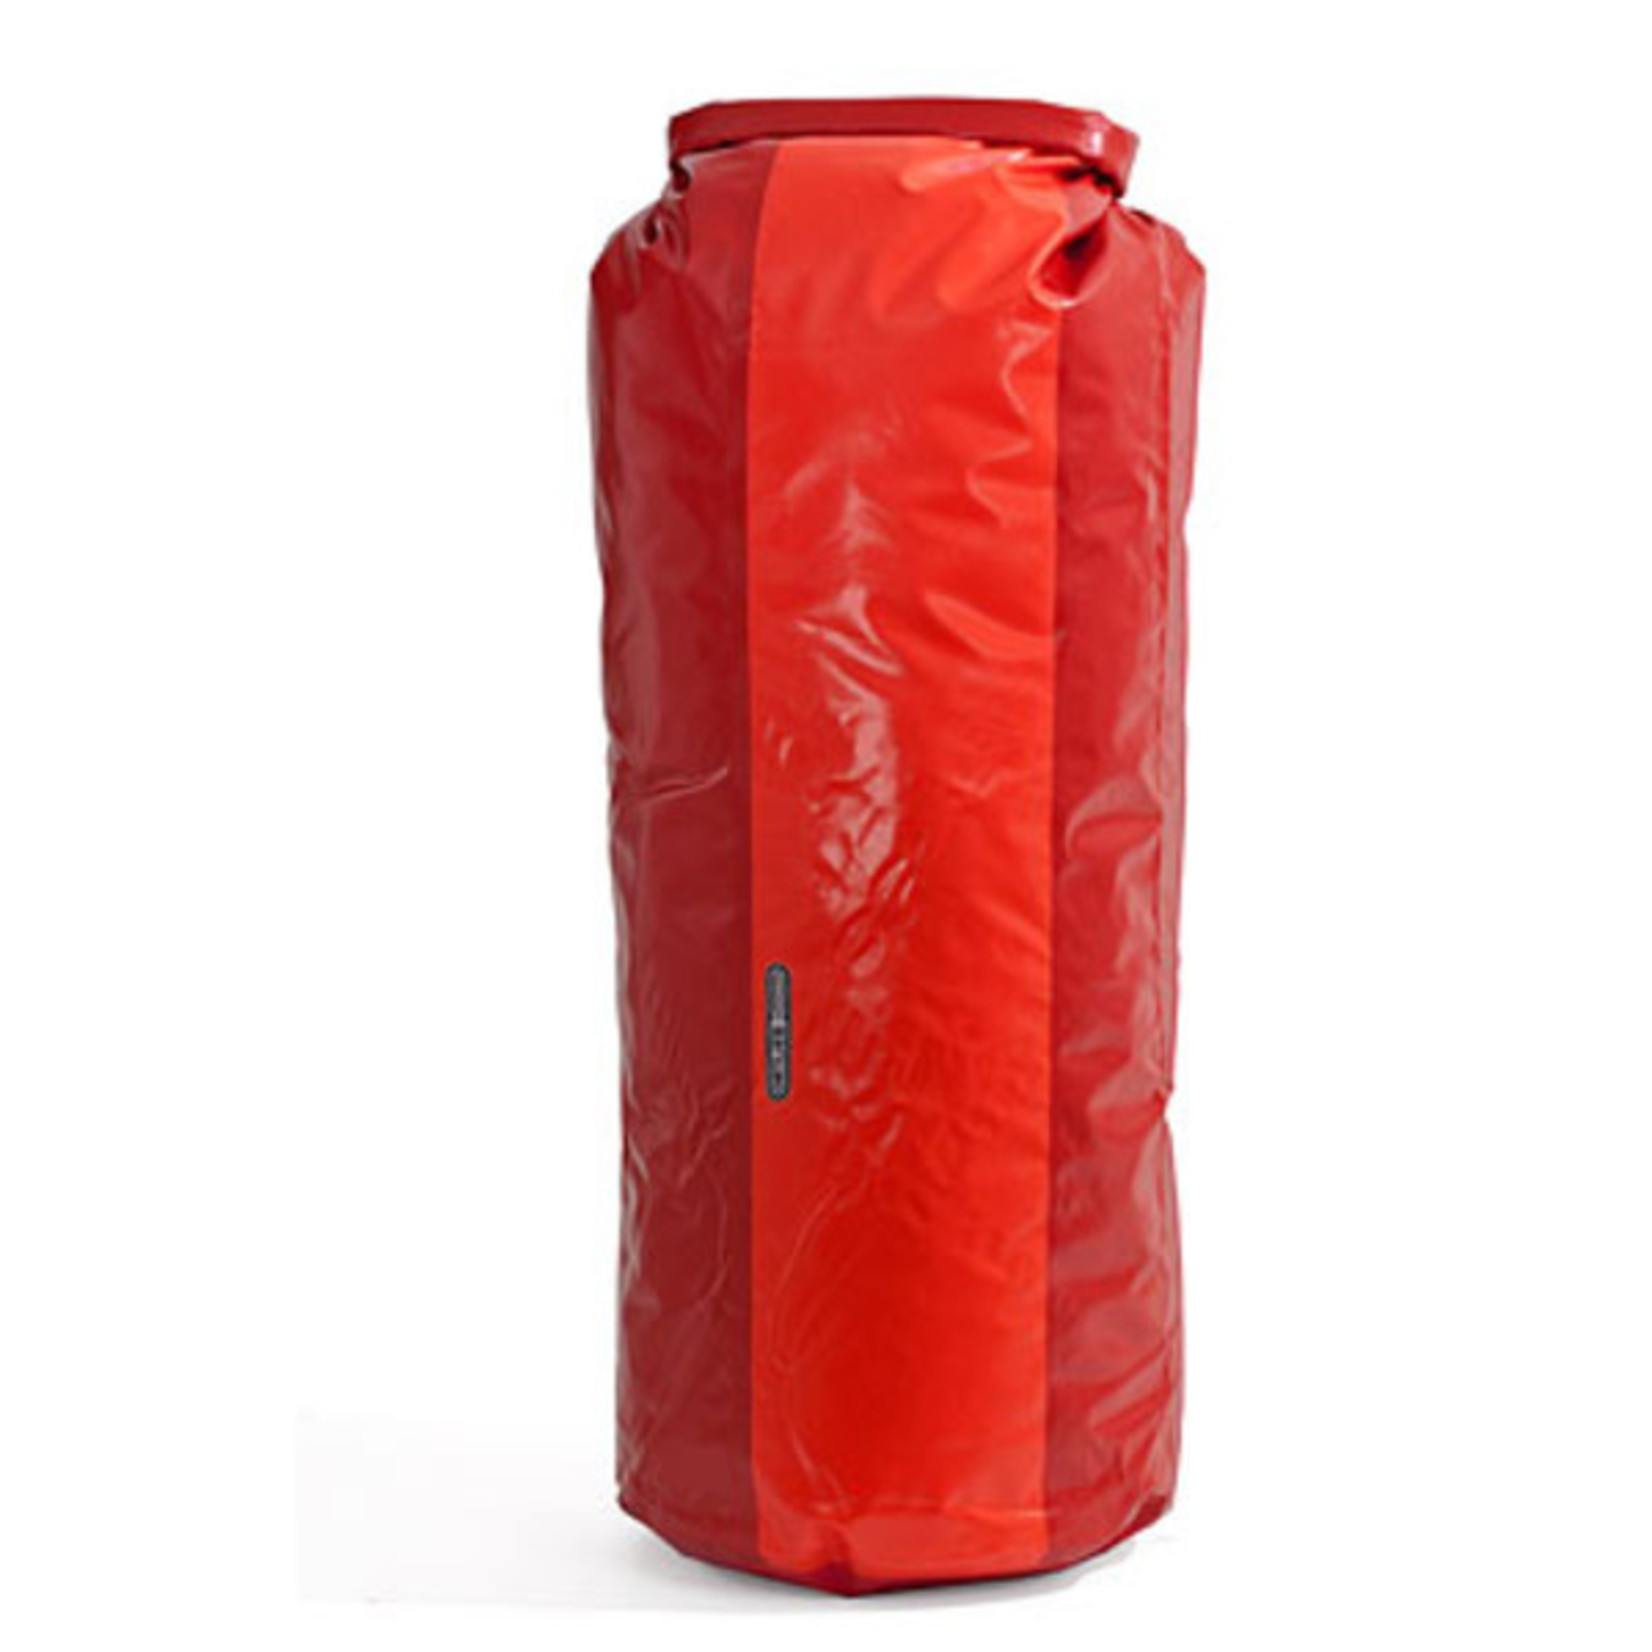 Ortlieb New Ortlieb PD 350 Dry Bag K4852 - 15-20cm/5-8Inch - 79L - Cranberry-Signal Red